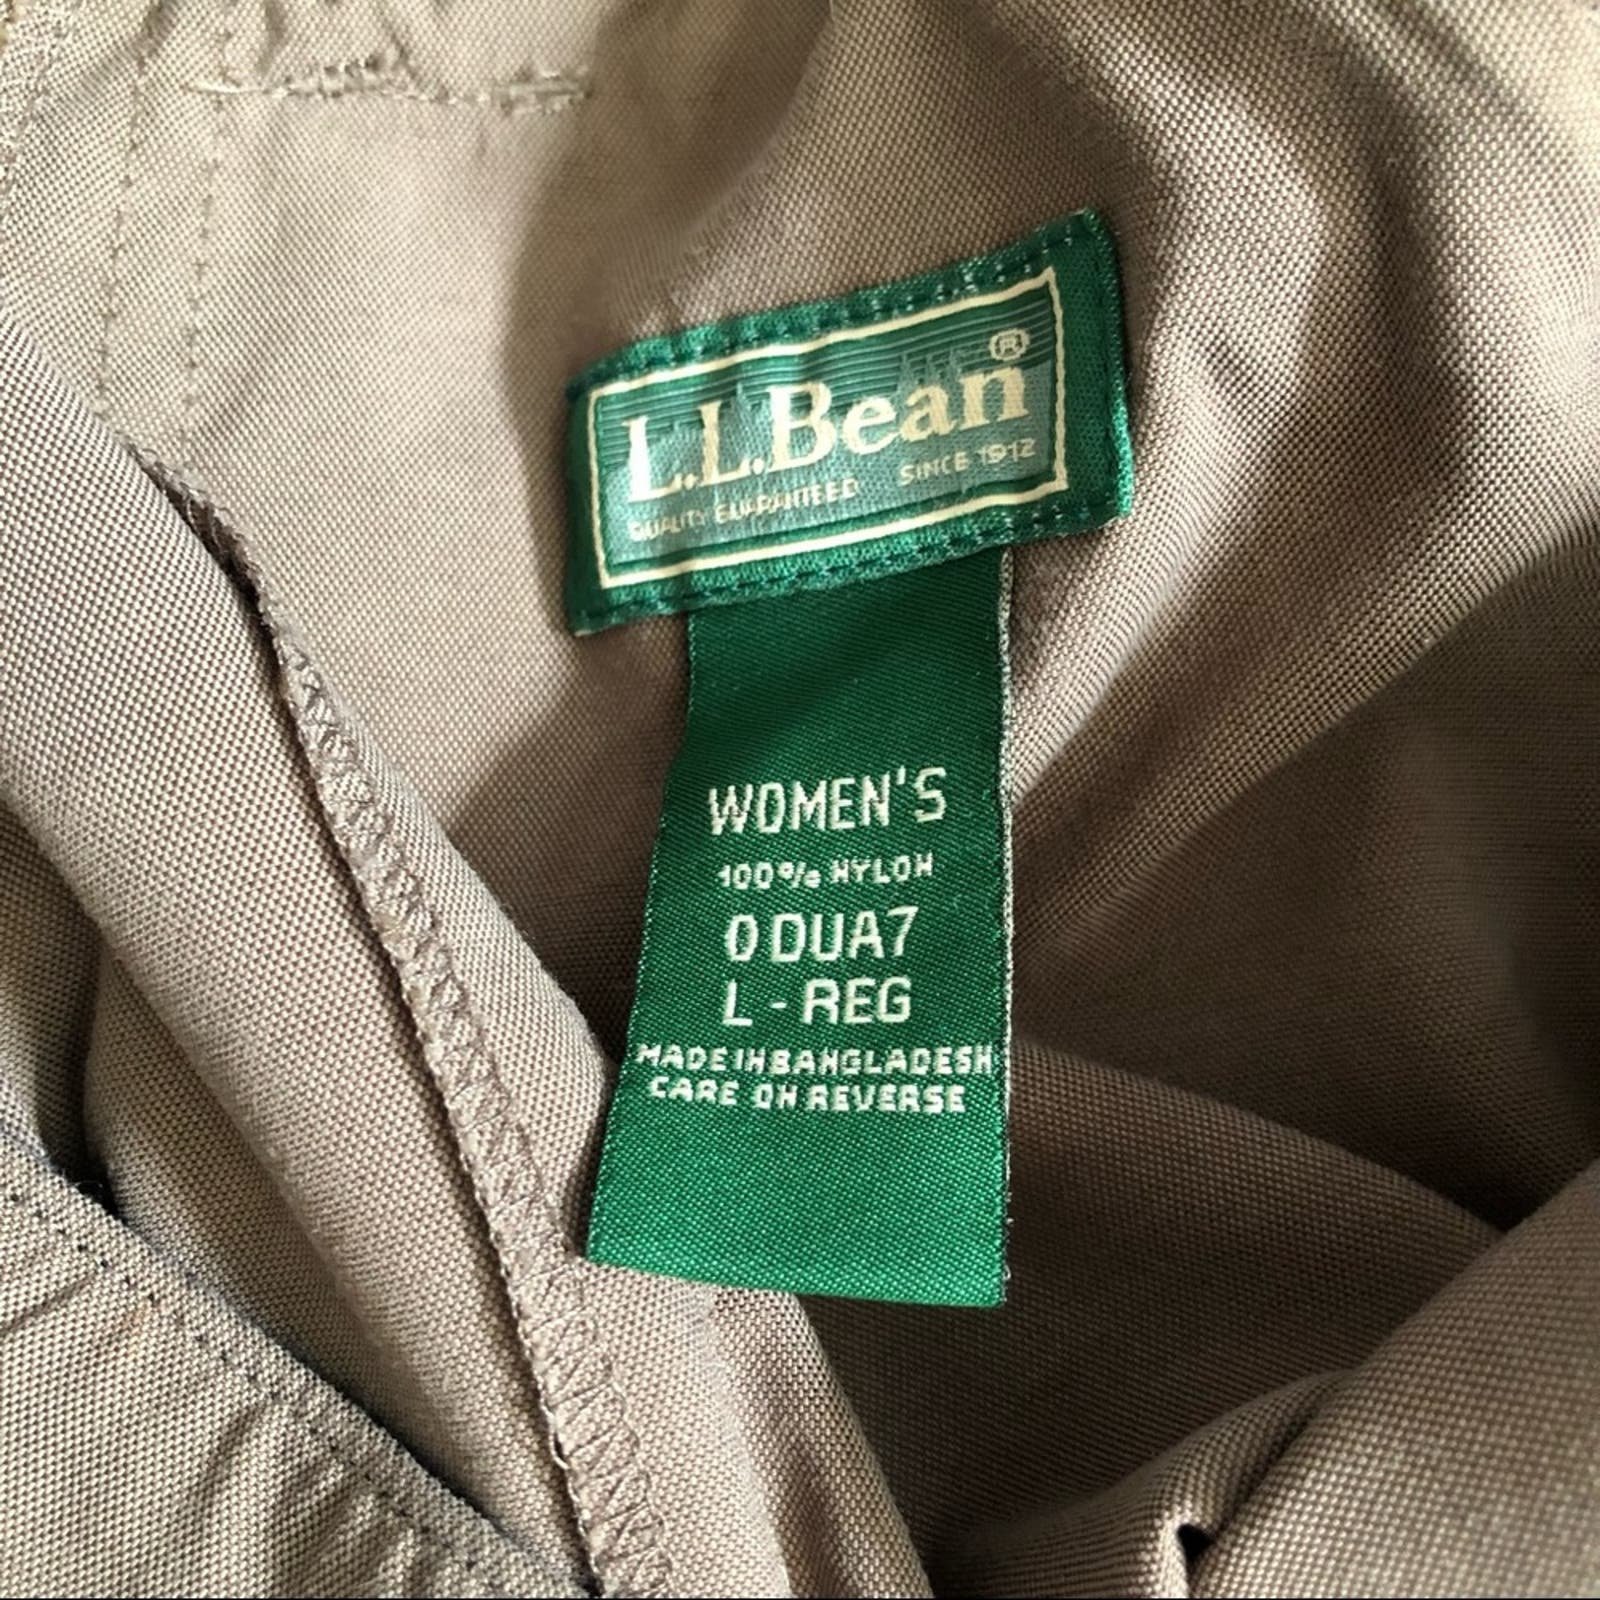 Custom L.L. Bean outdoor shorts hiking camping Cargo 100% nylon Olive Green Army Large iRxEvAYia outlet online shop